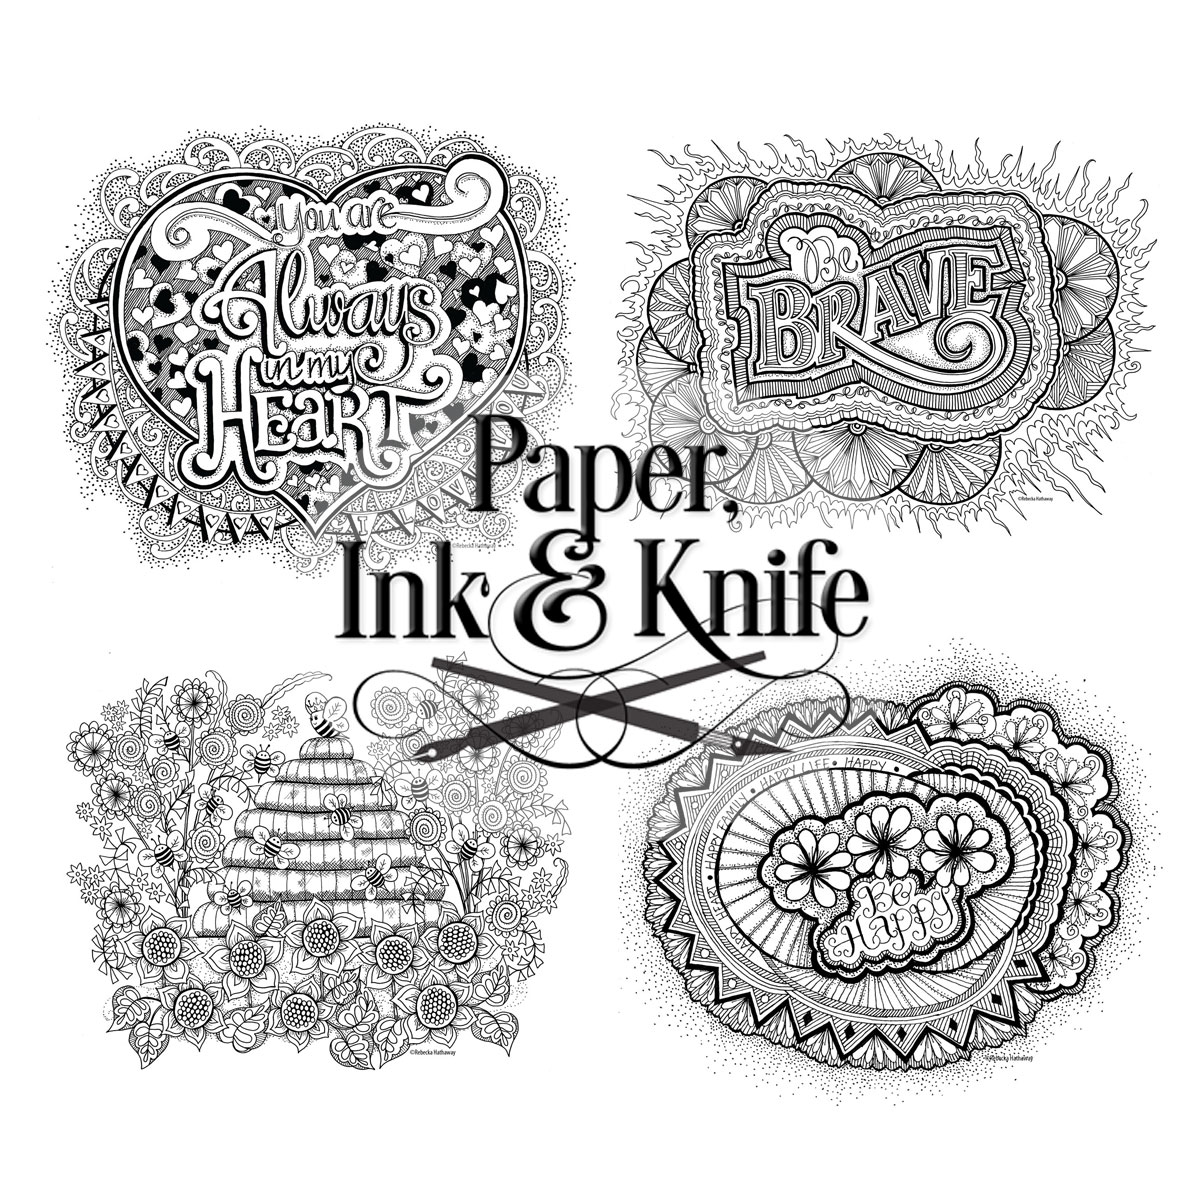 Intricate Coloring Pages Pdf - valyukevicnez